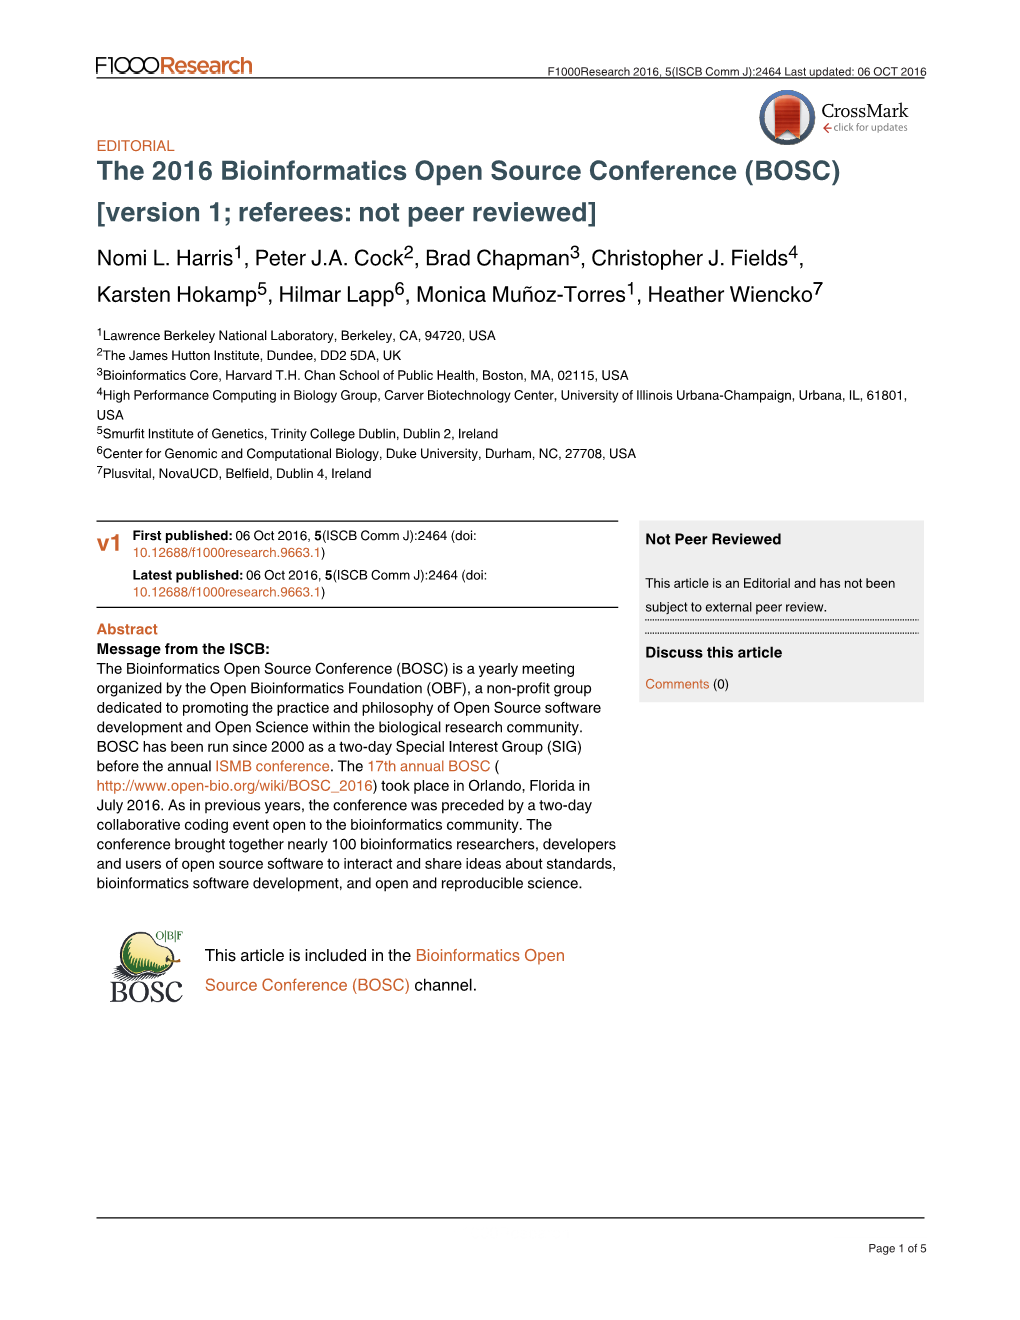 The 2016 Bioinformatics Open Source Conference (BOSC) [Version 1; Referees: Not Peer Reviewed] Nomi L